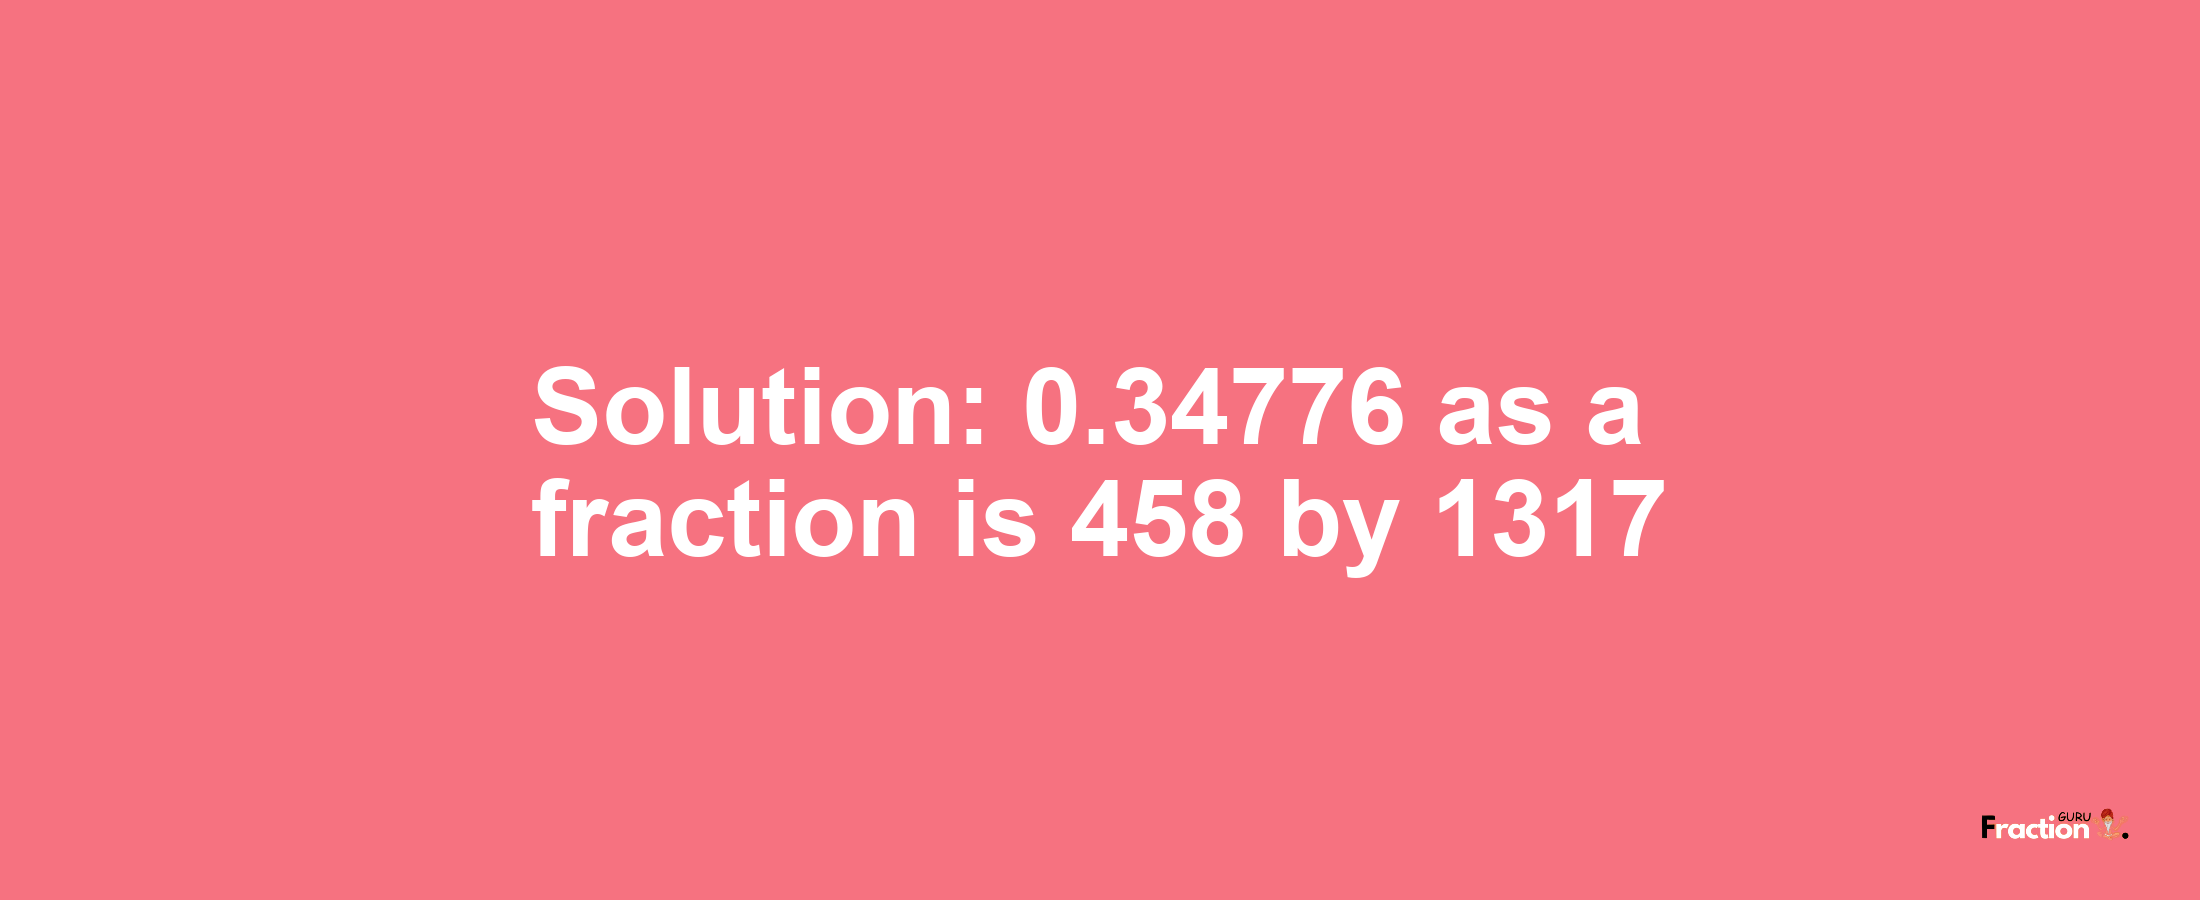 Solution:0.34776 as a fraction is 458/1317